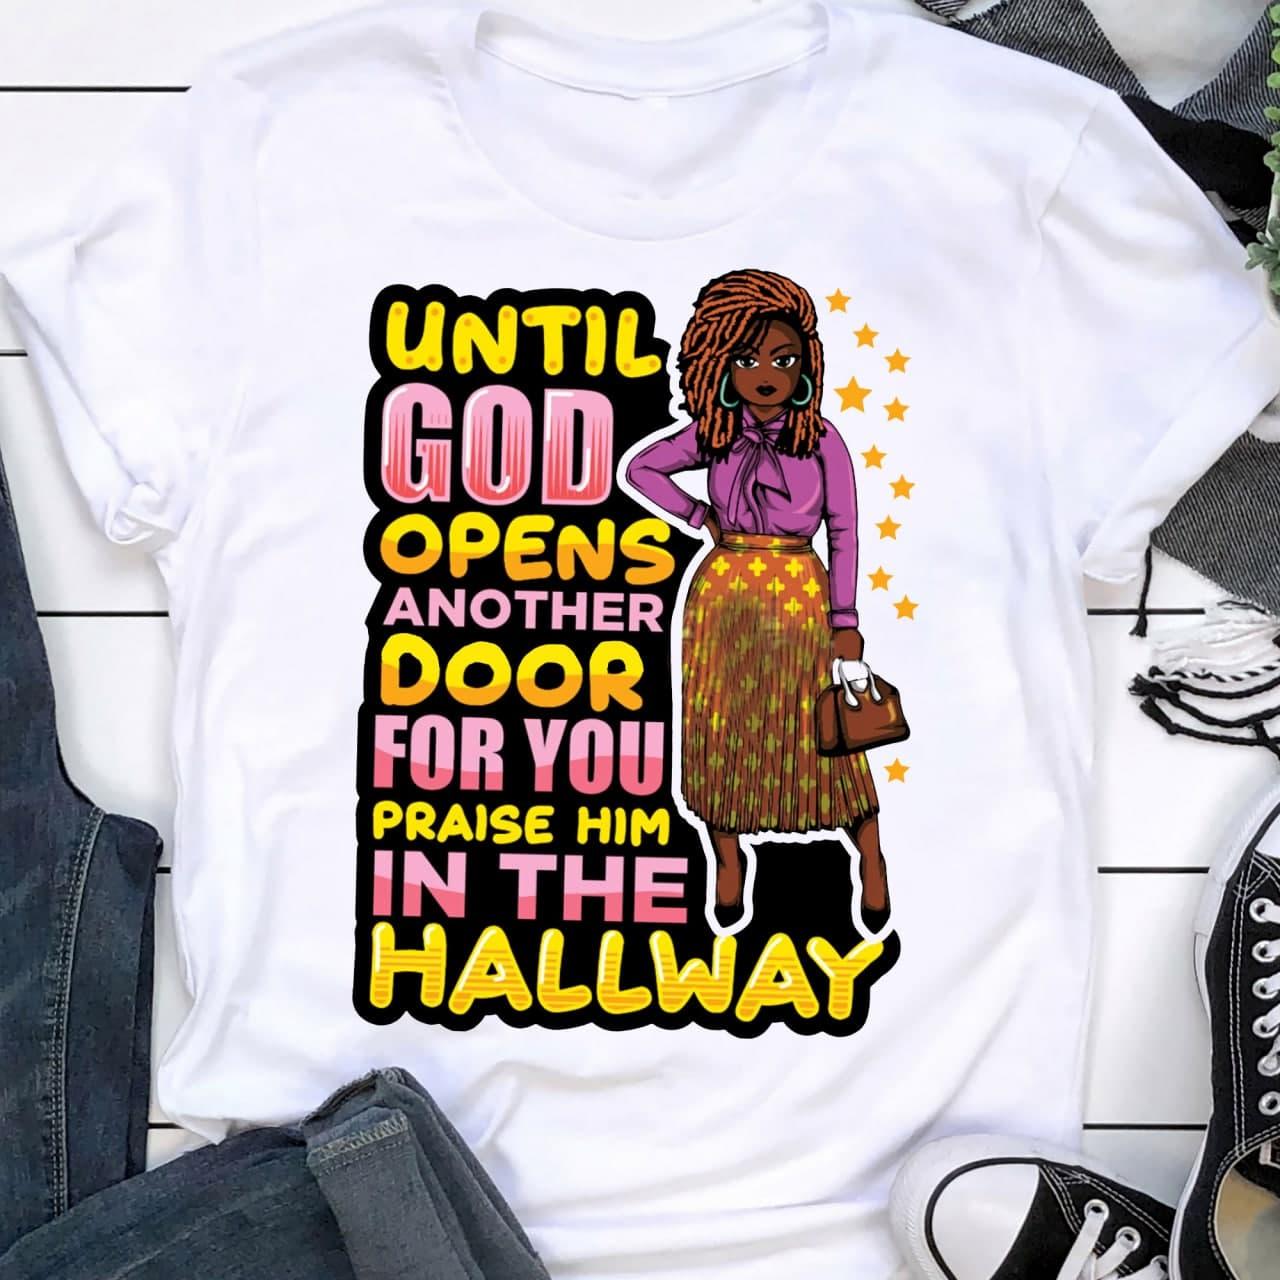 Black Woman - Until god opens another door for you praise him in the hallway